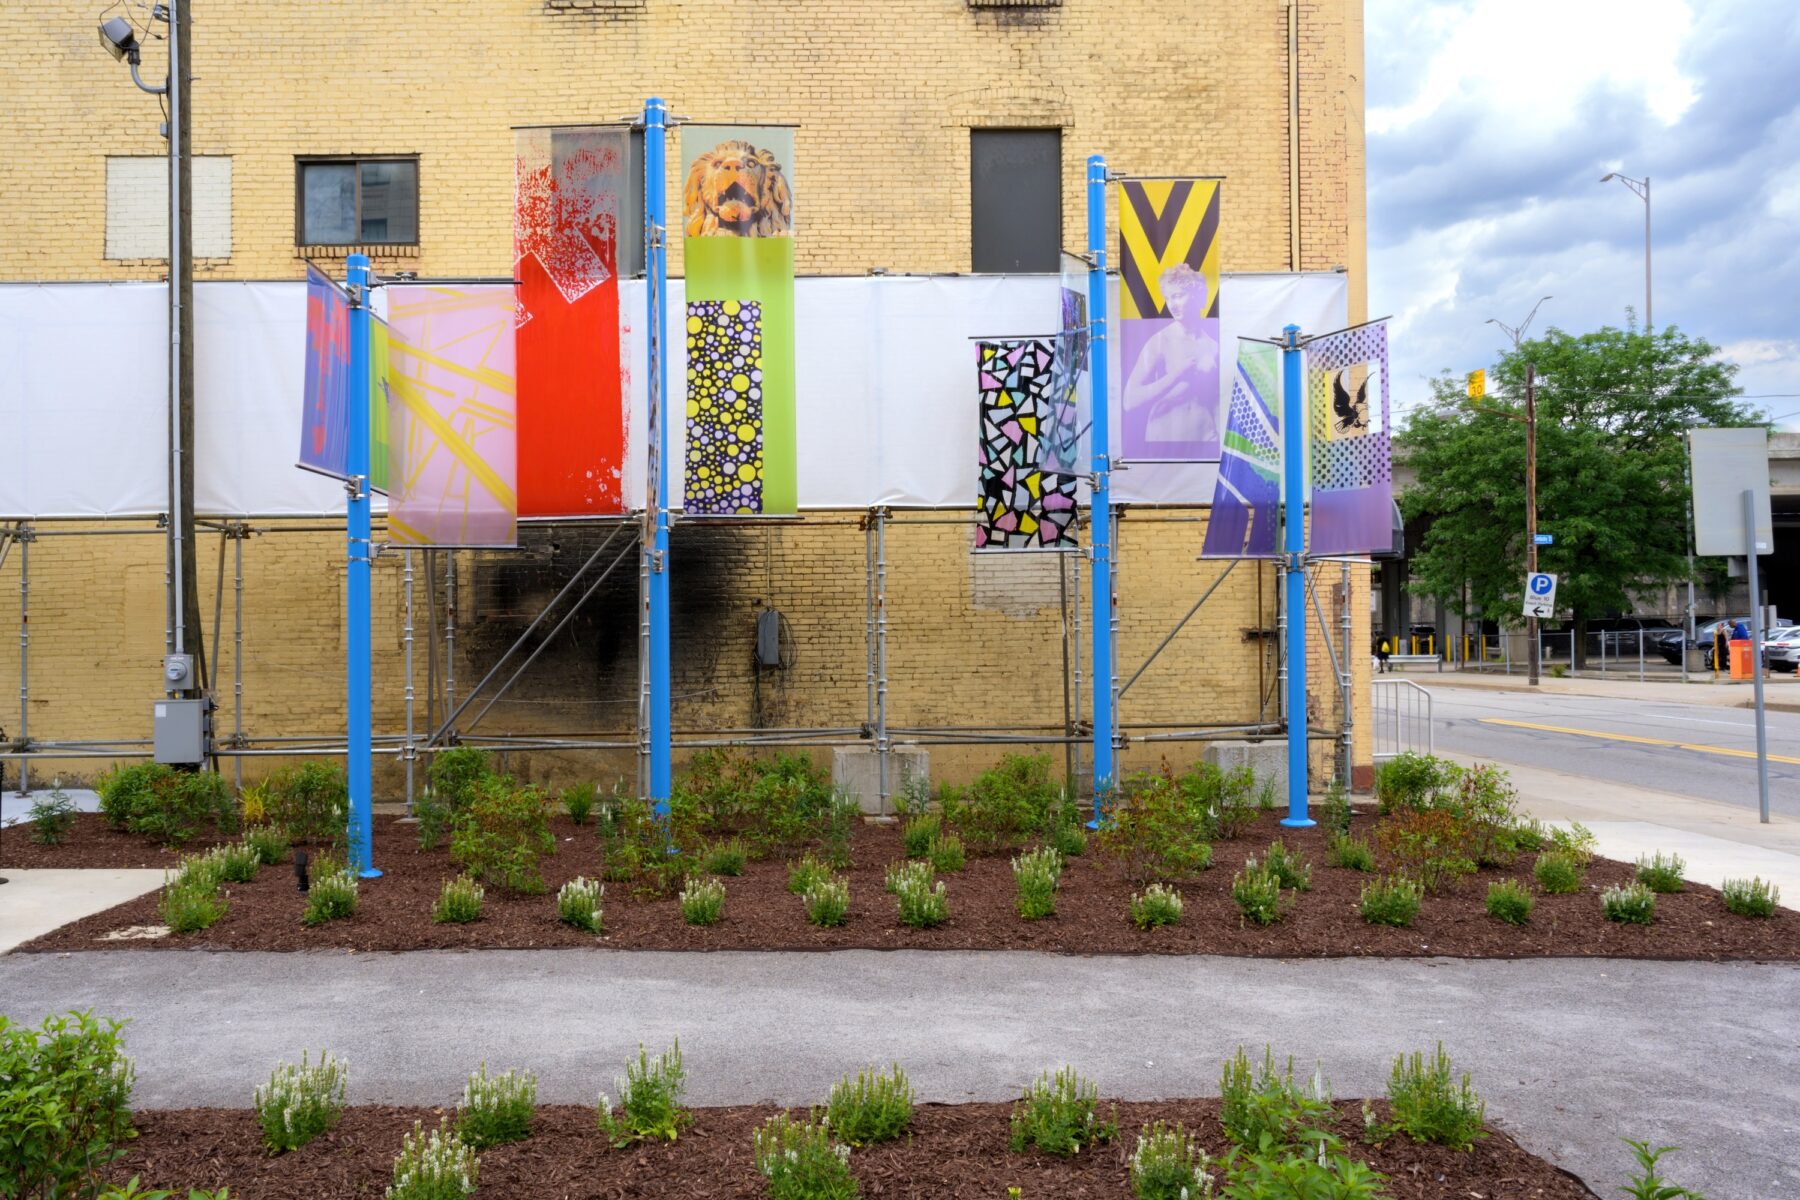 Installation image of art on 4 blue poles each with two colorful transparent banners that have various images on them.